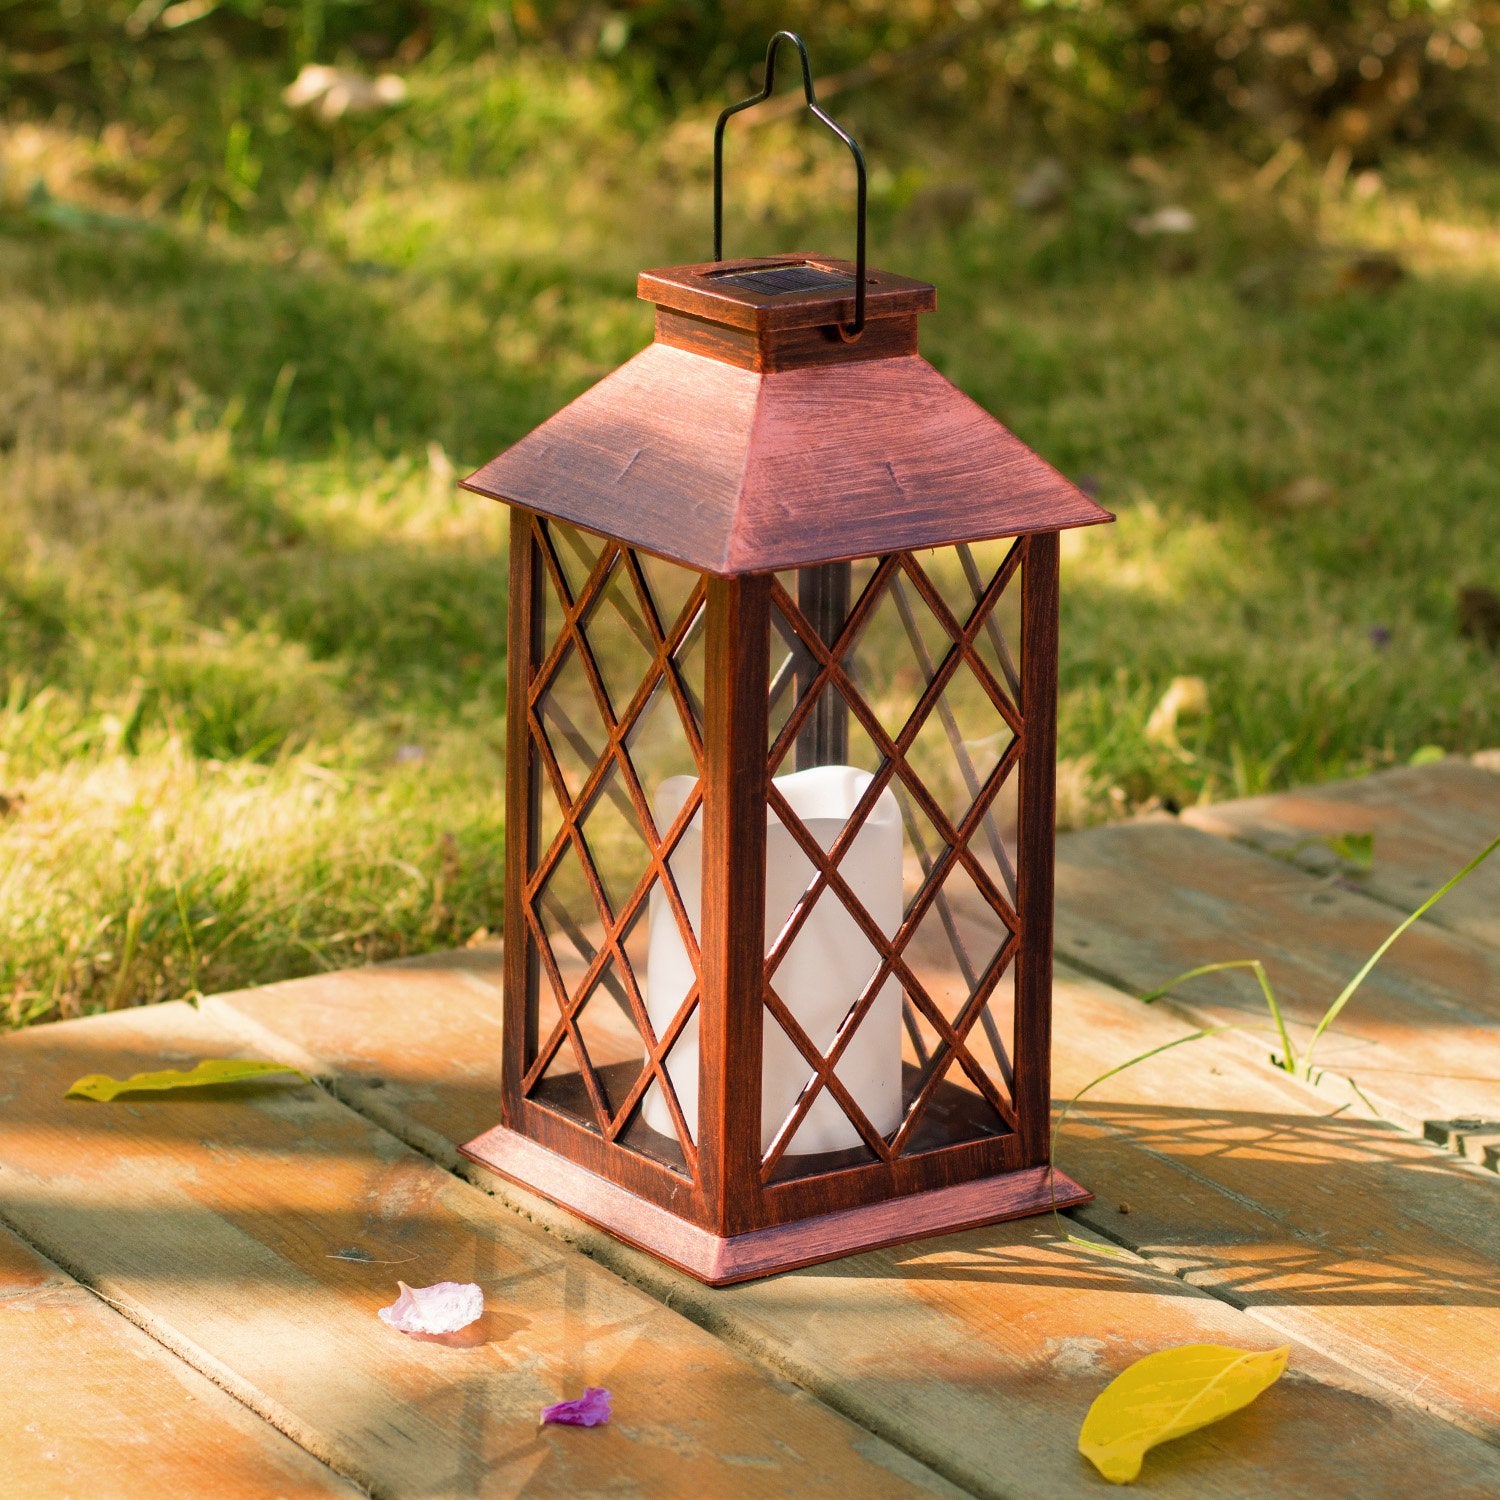 TAKE ME Solar Lantern,Outdoor Garden Hanging Lantern-Waterproof LED Flickering Flameless Candles Mission Lantern for Table,Outdoor,Party